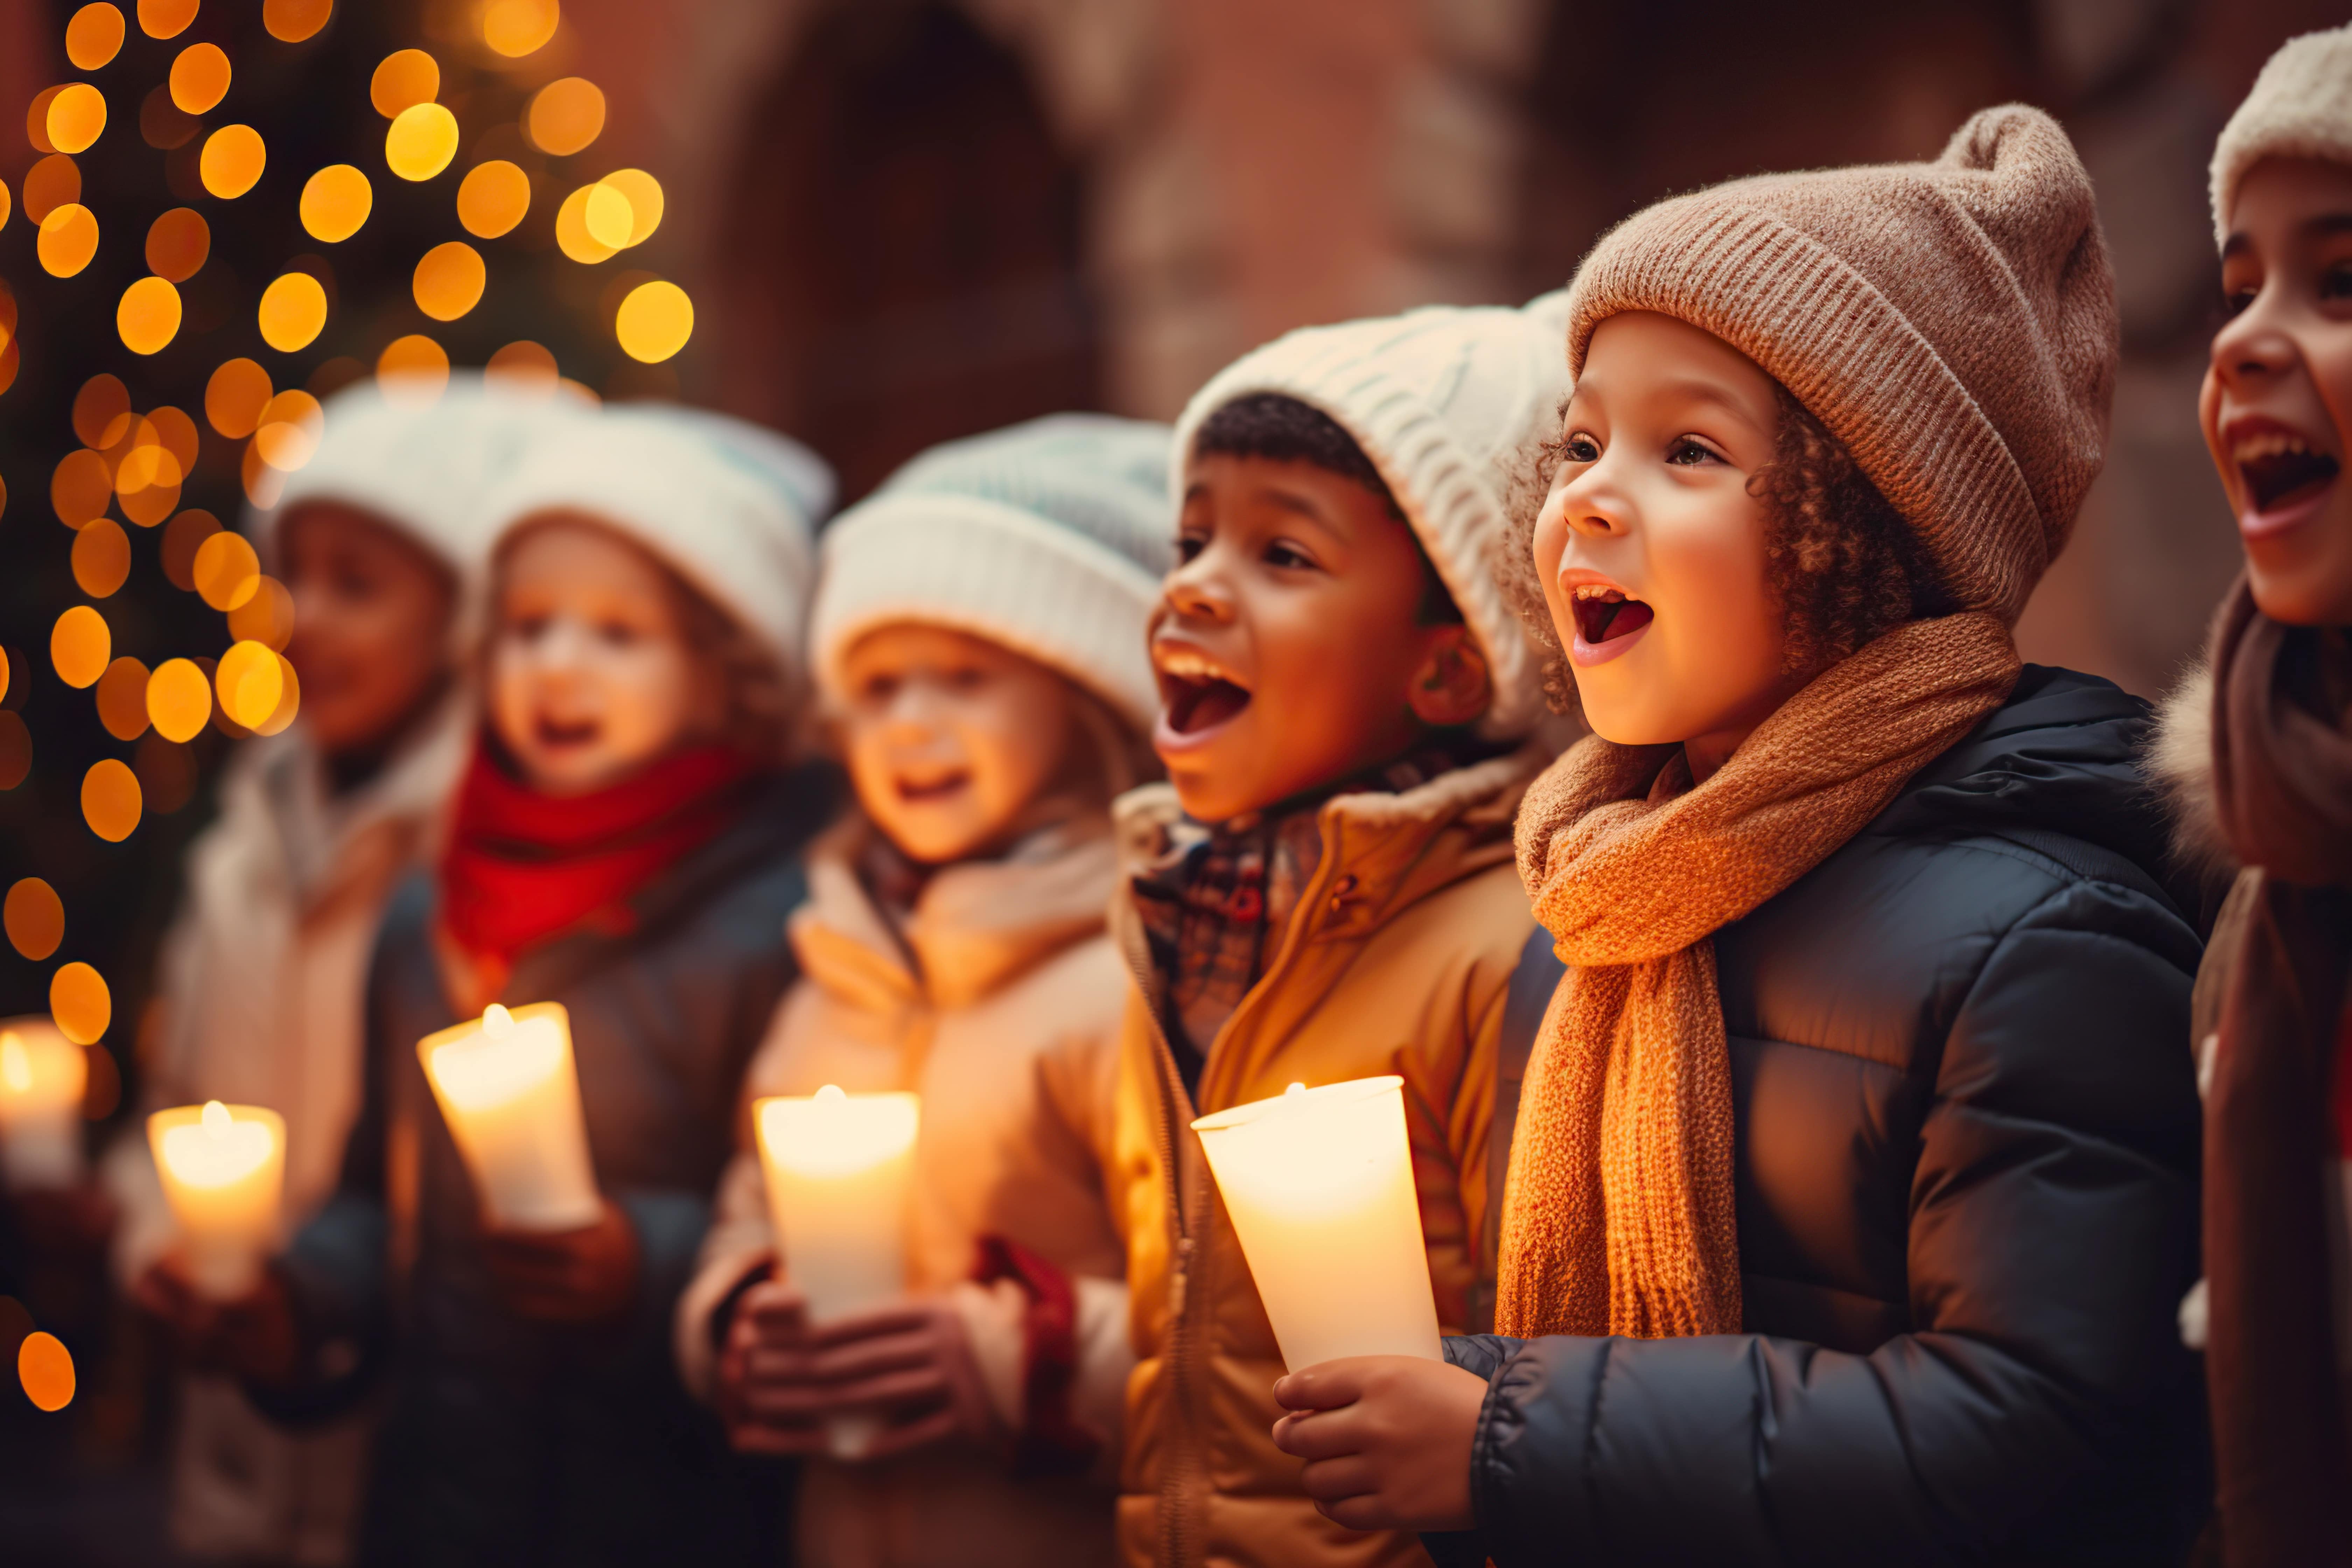 A line of children wearing woolly winter hats, holding candles and singing Christmas carols. There is a Christmas tree strung with fairy lights blurred out in the background